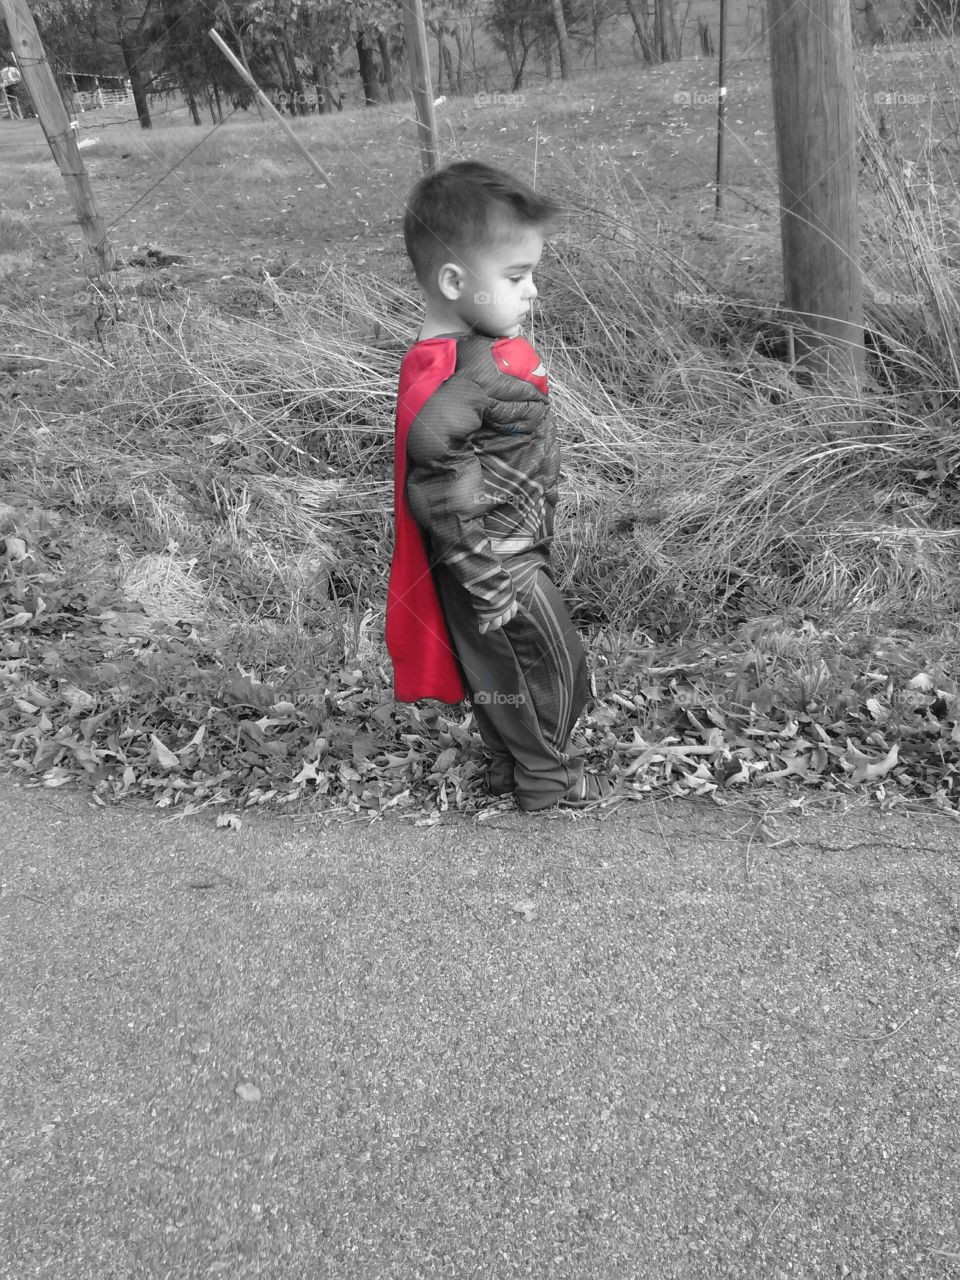 Superboy deep in thought